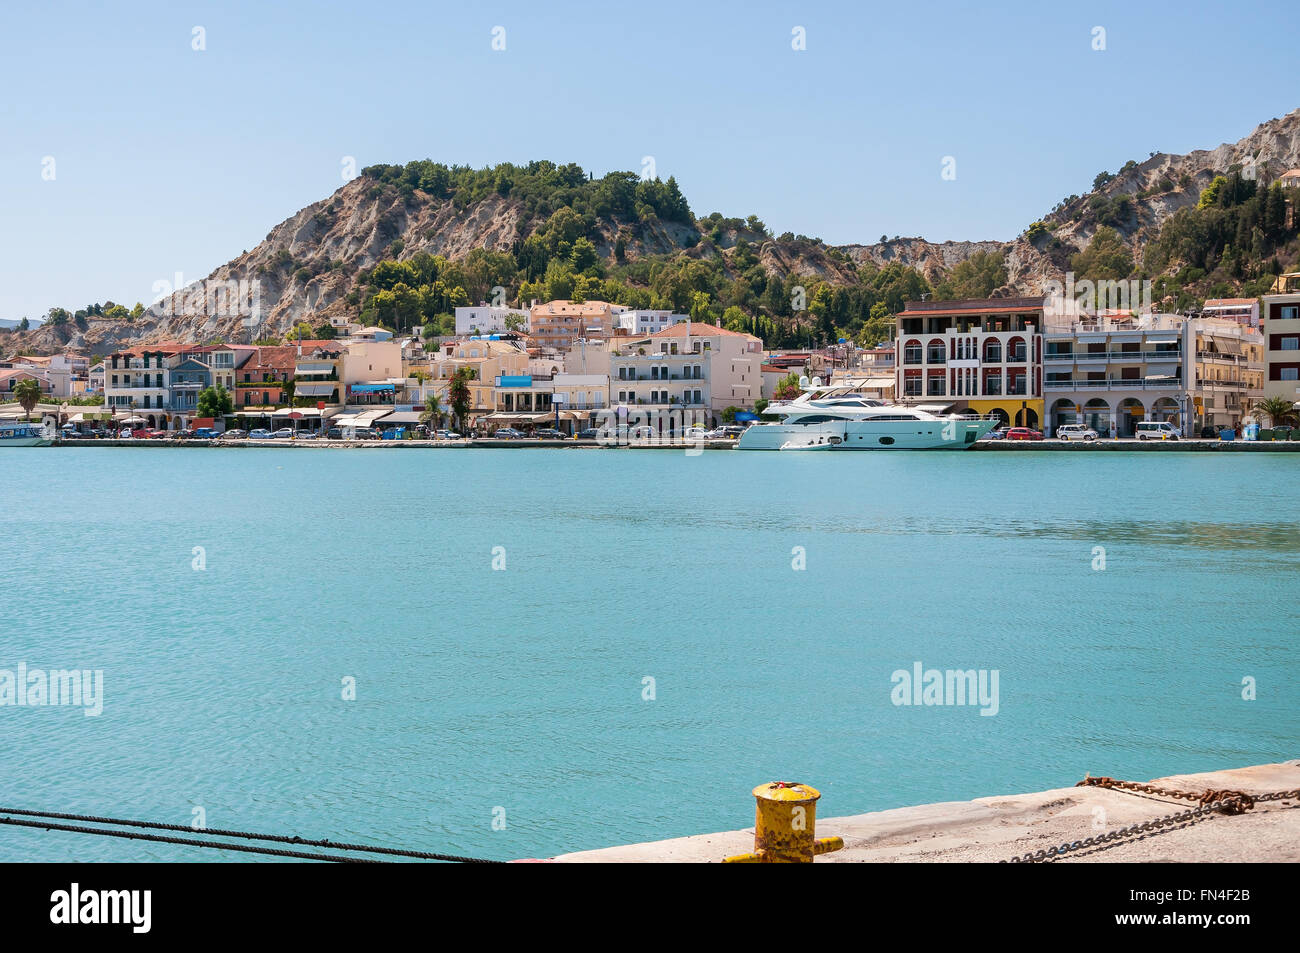 View of town and port of Zakynthos city, Greece Stock Photo